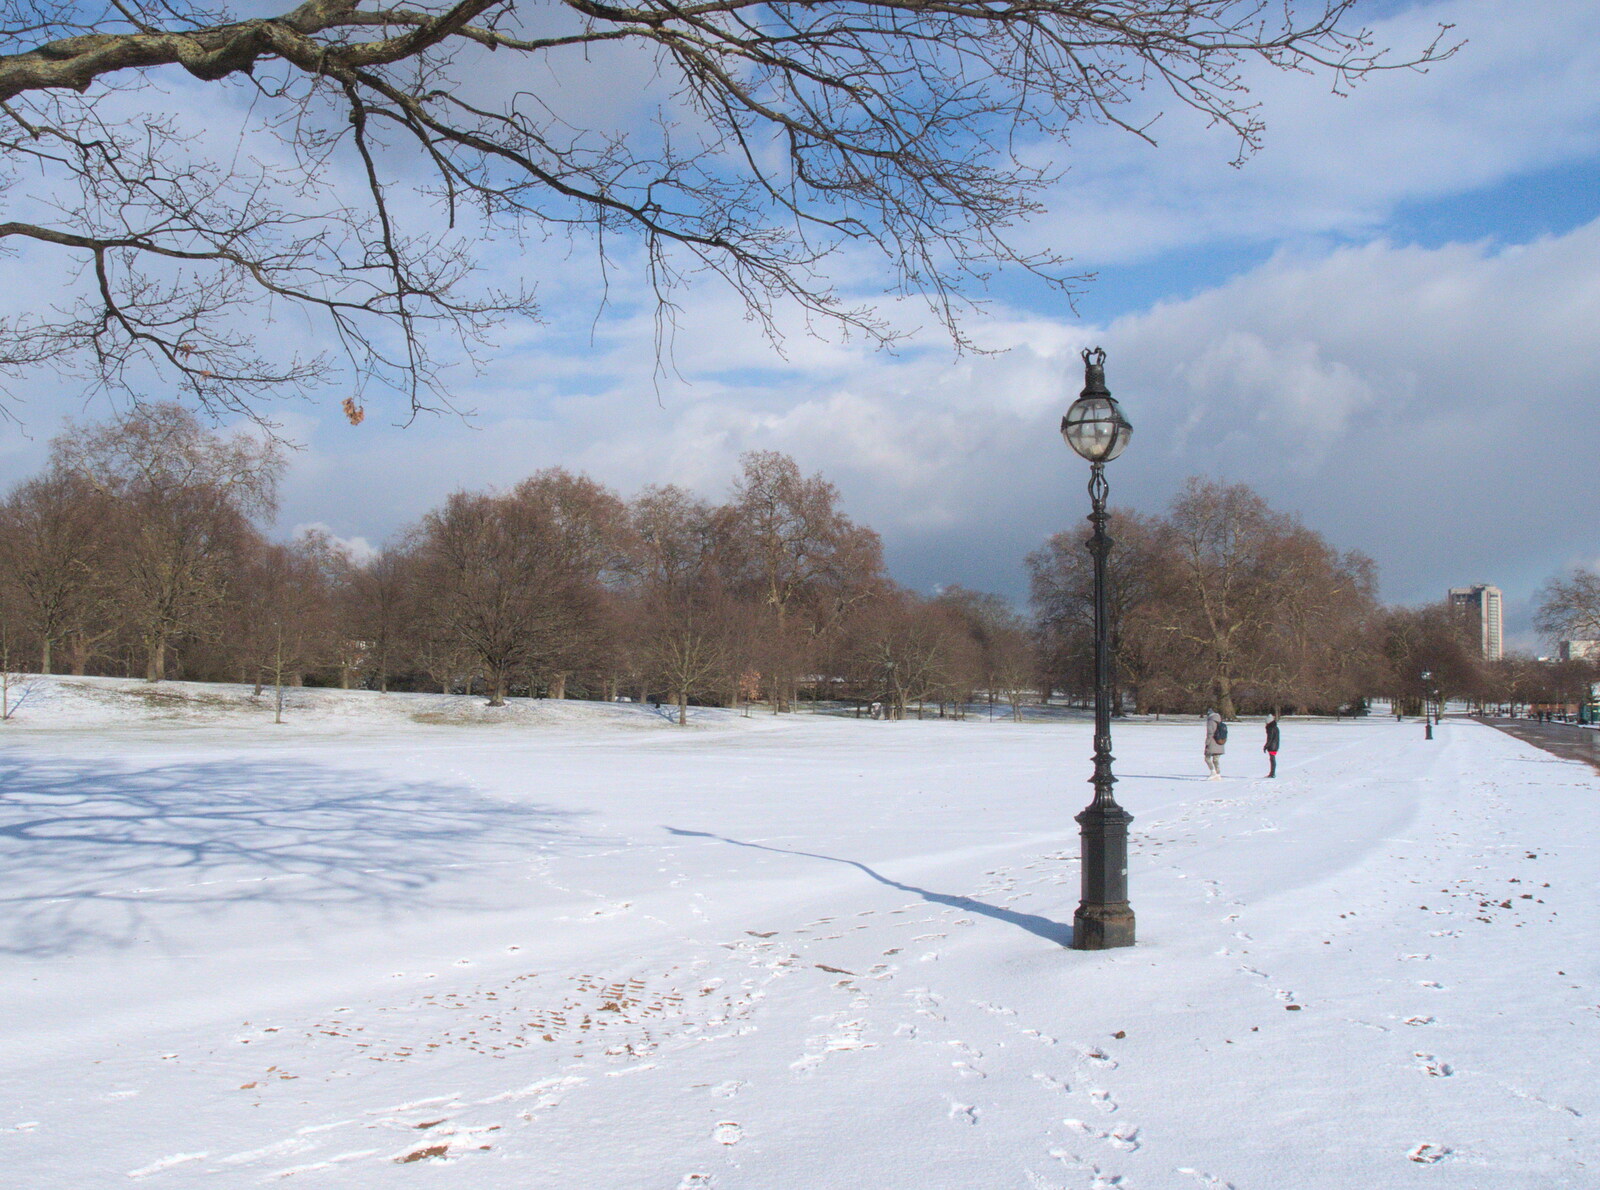 Snowmageddon: The Beast From the East, Suffolk and London - 27th February 2018: A snowy Hyde Park